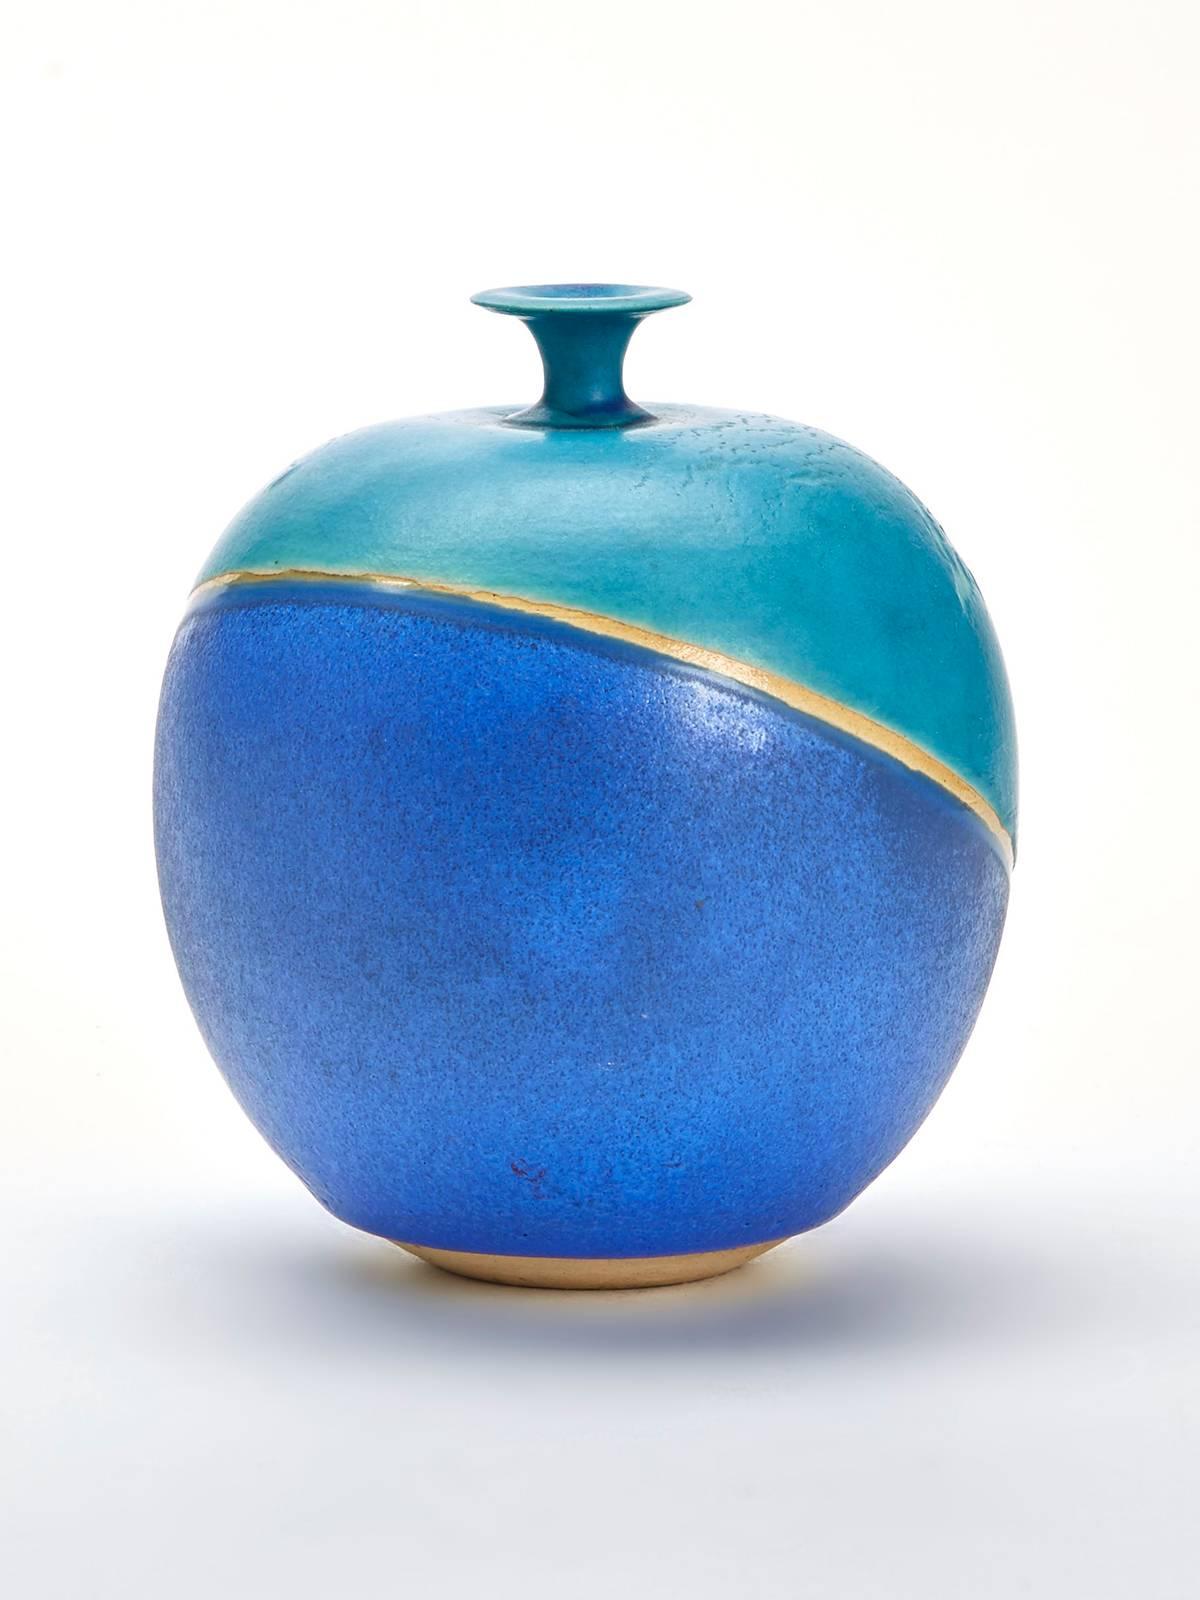 A vintage Studio Pottery modernist vase of rounded shape decorated in blue and turquoise glazes with an unglazed band around the body. The vase has a narrow raised flat formed top and is signed Brancusi to the base. We have been unable to identify